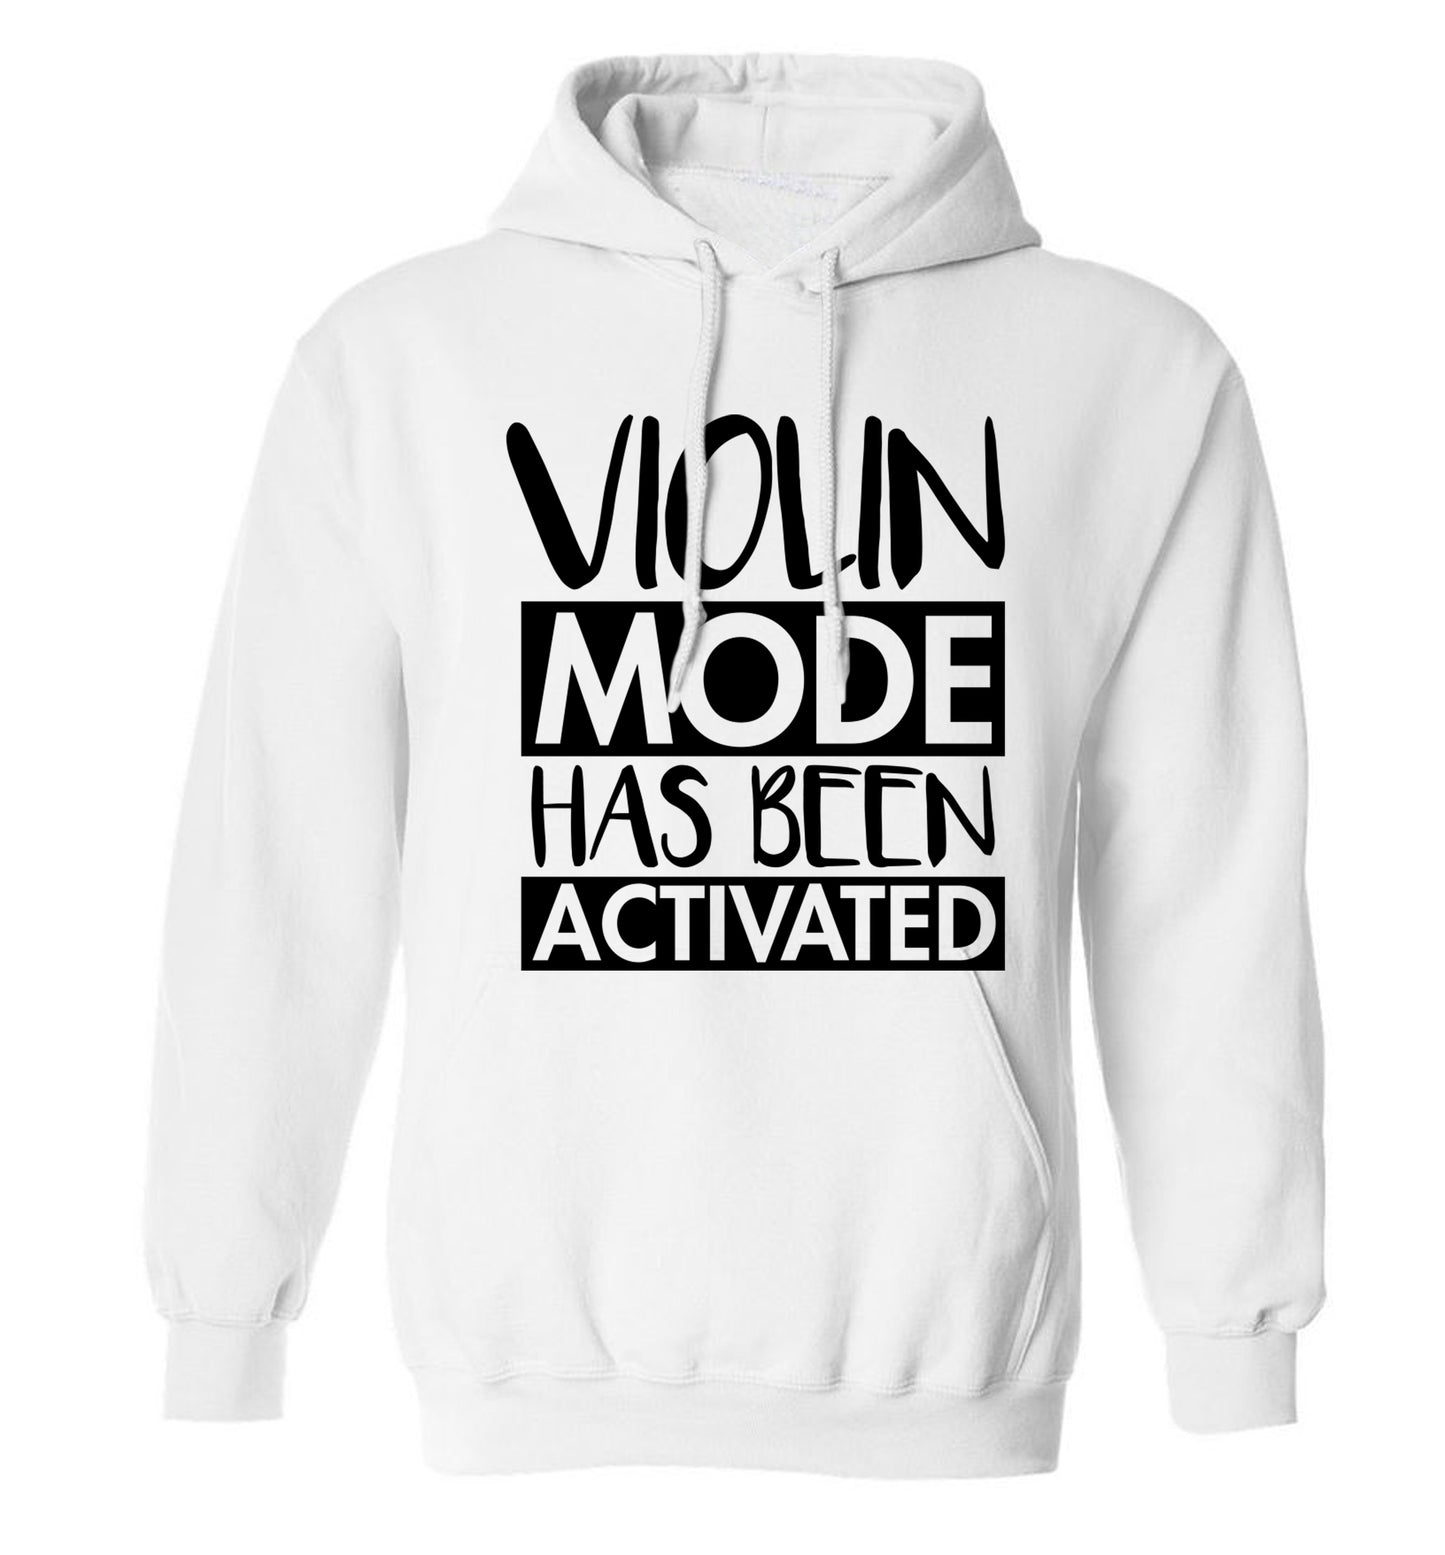 Violin Mode Activated adults unisex white hoodie 2XL